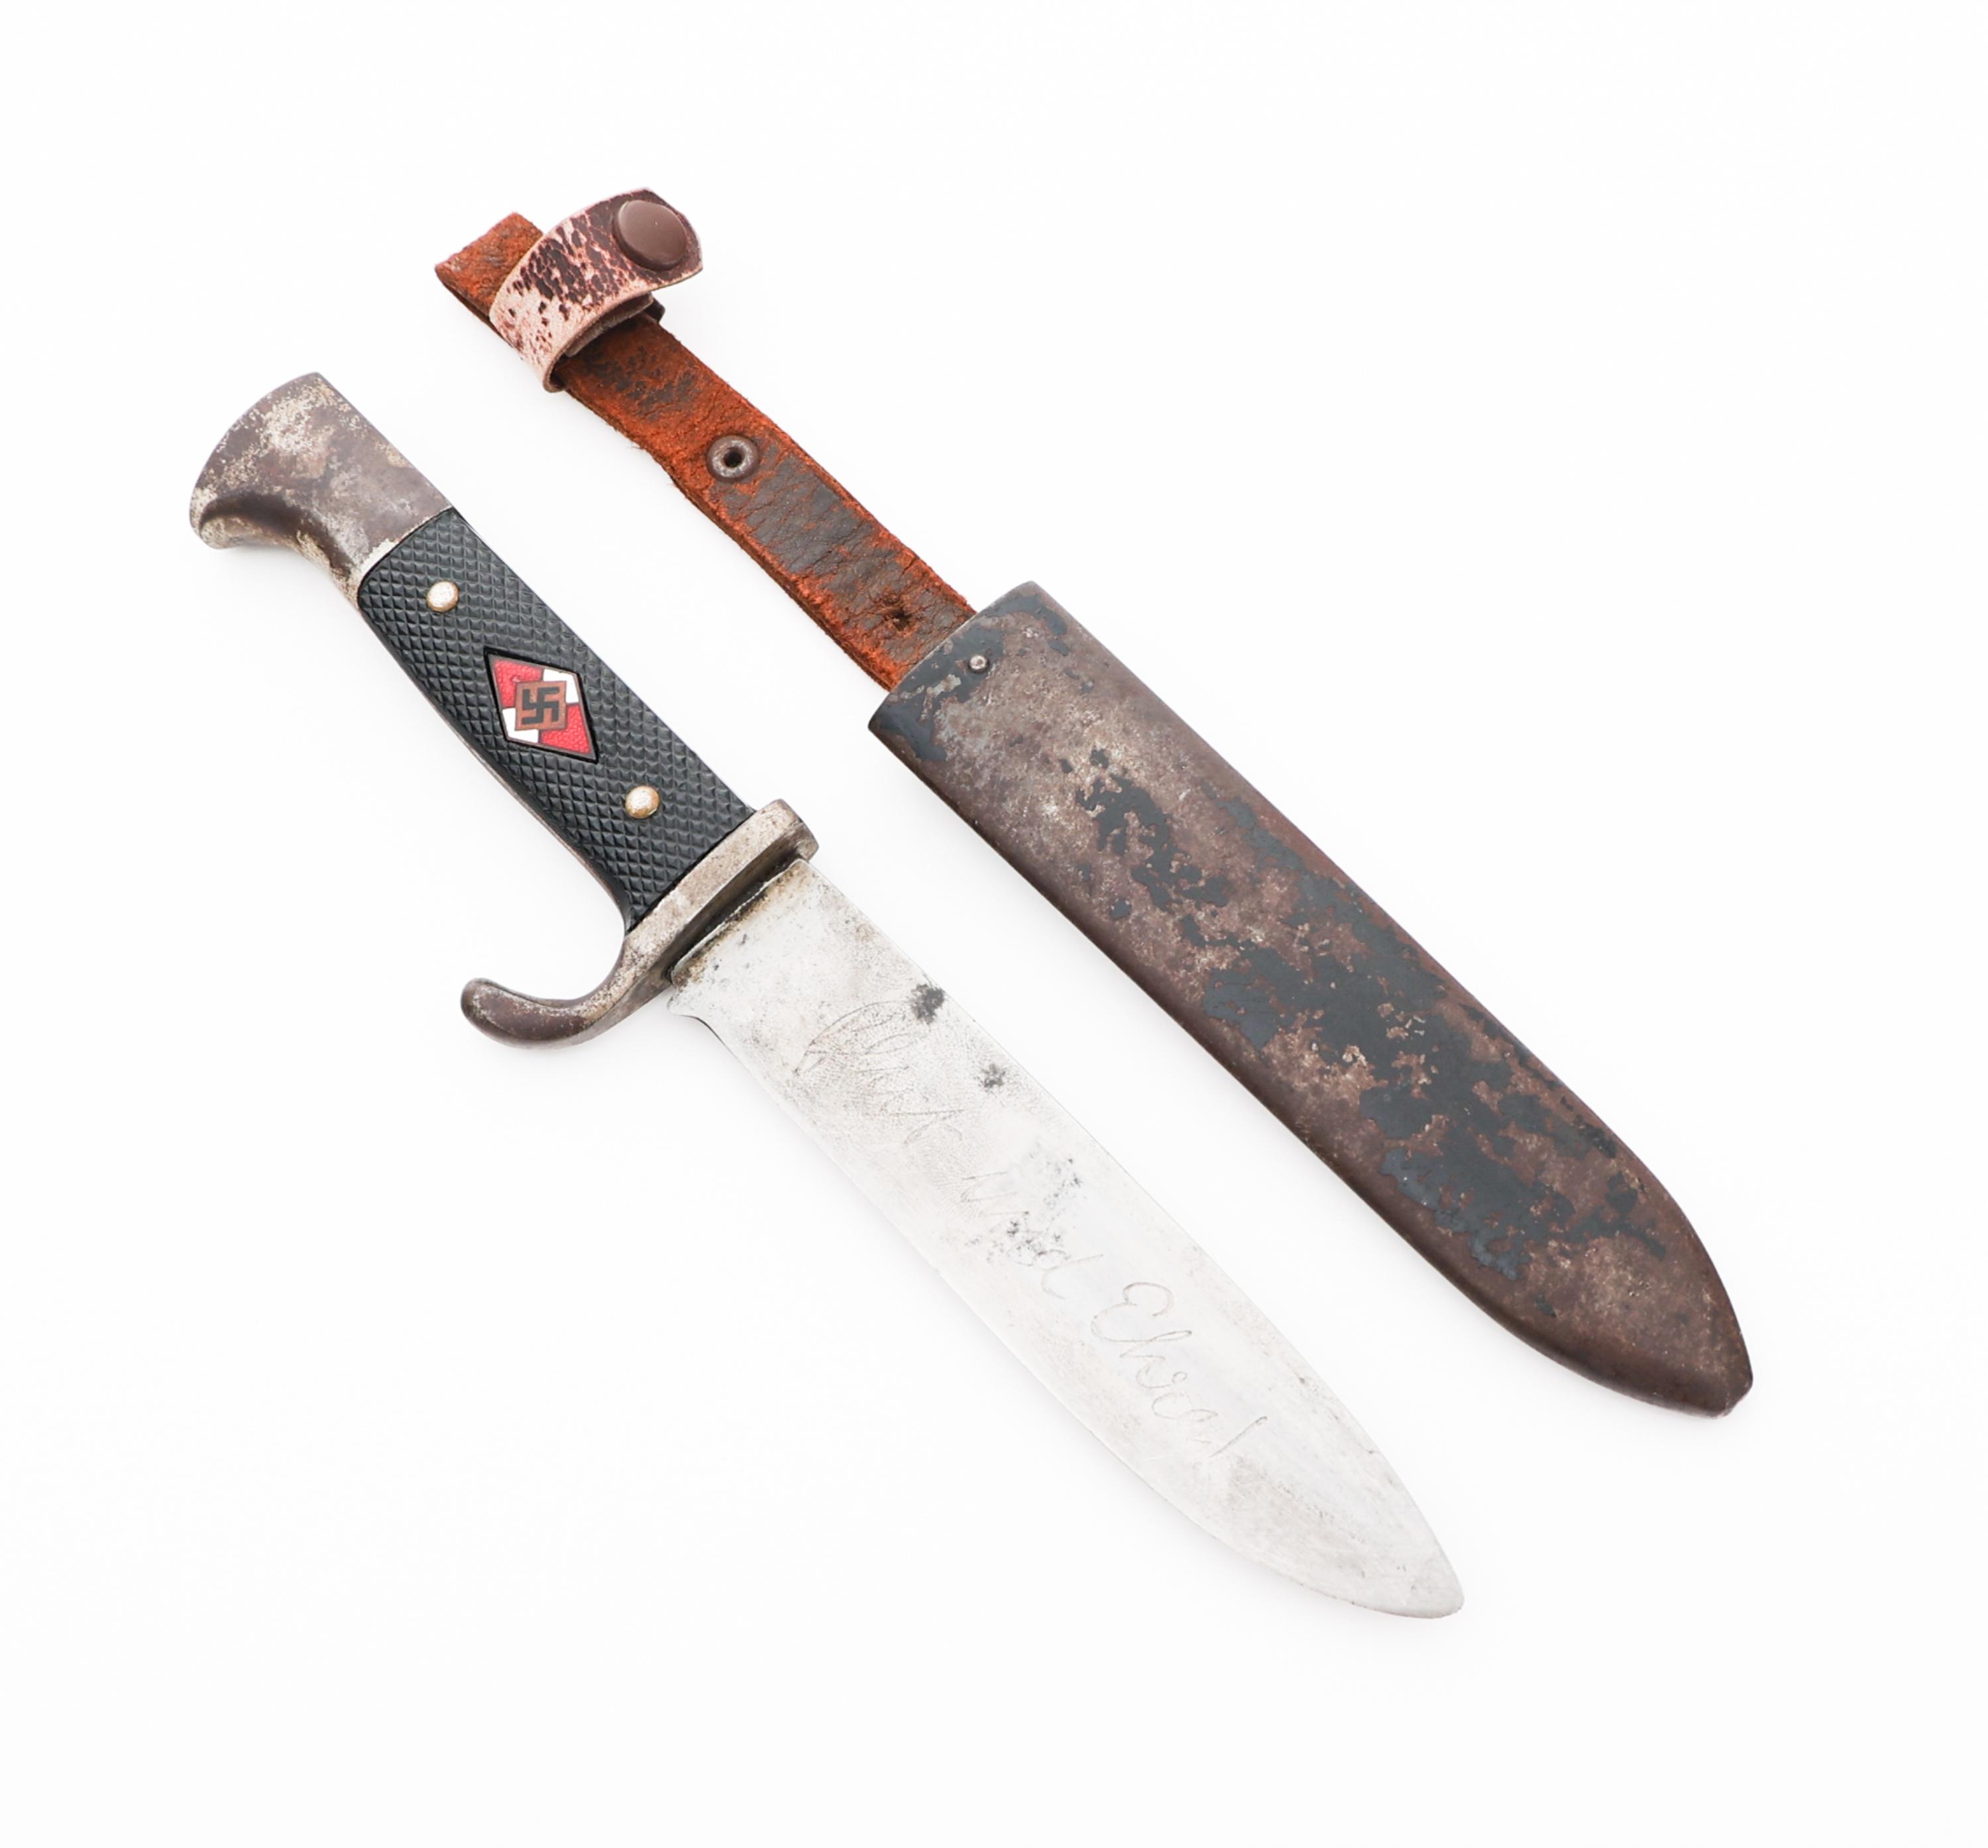 WWII GERMAN HITLER YOUTH KNIFE MOTTO by HEIDELBERG